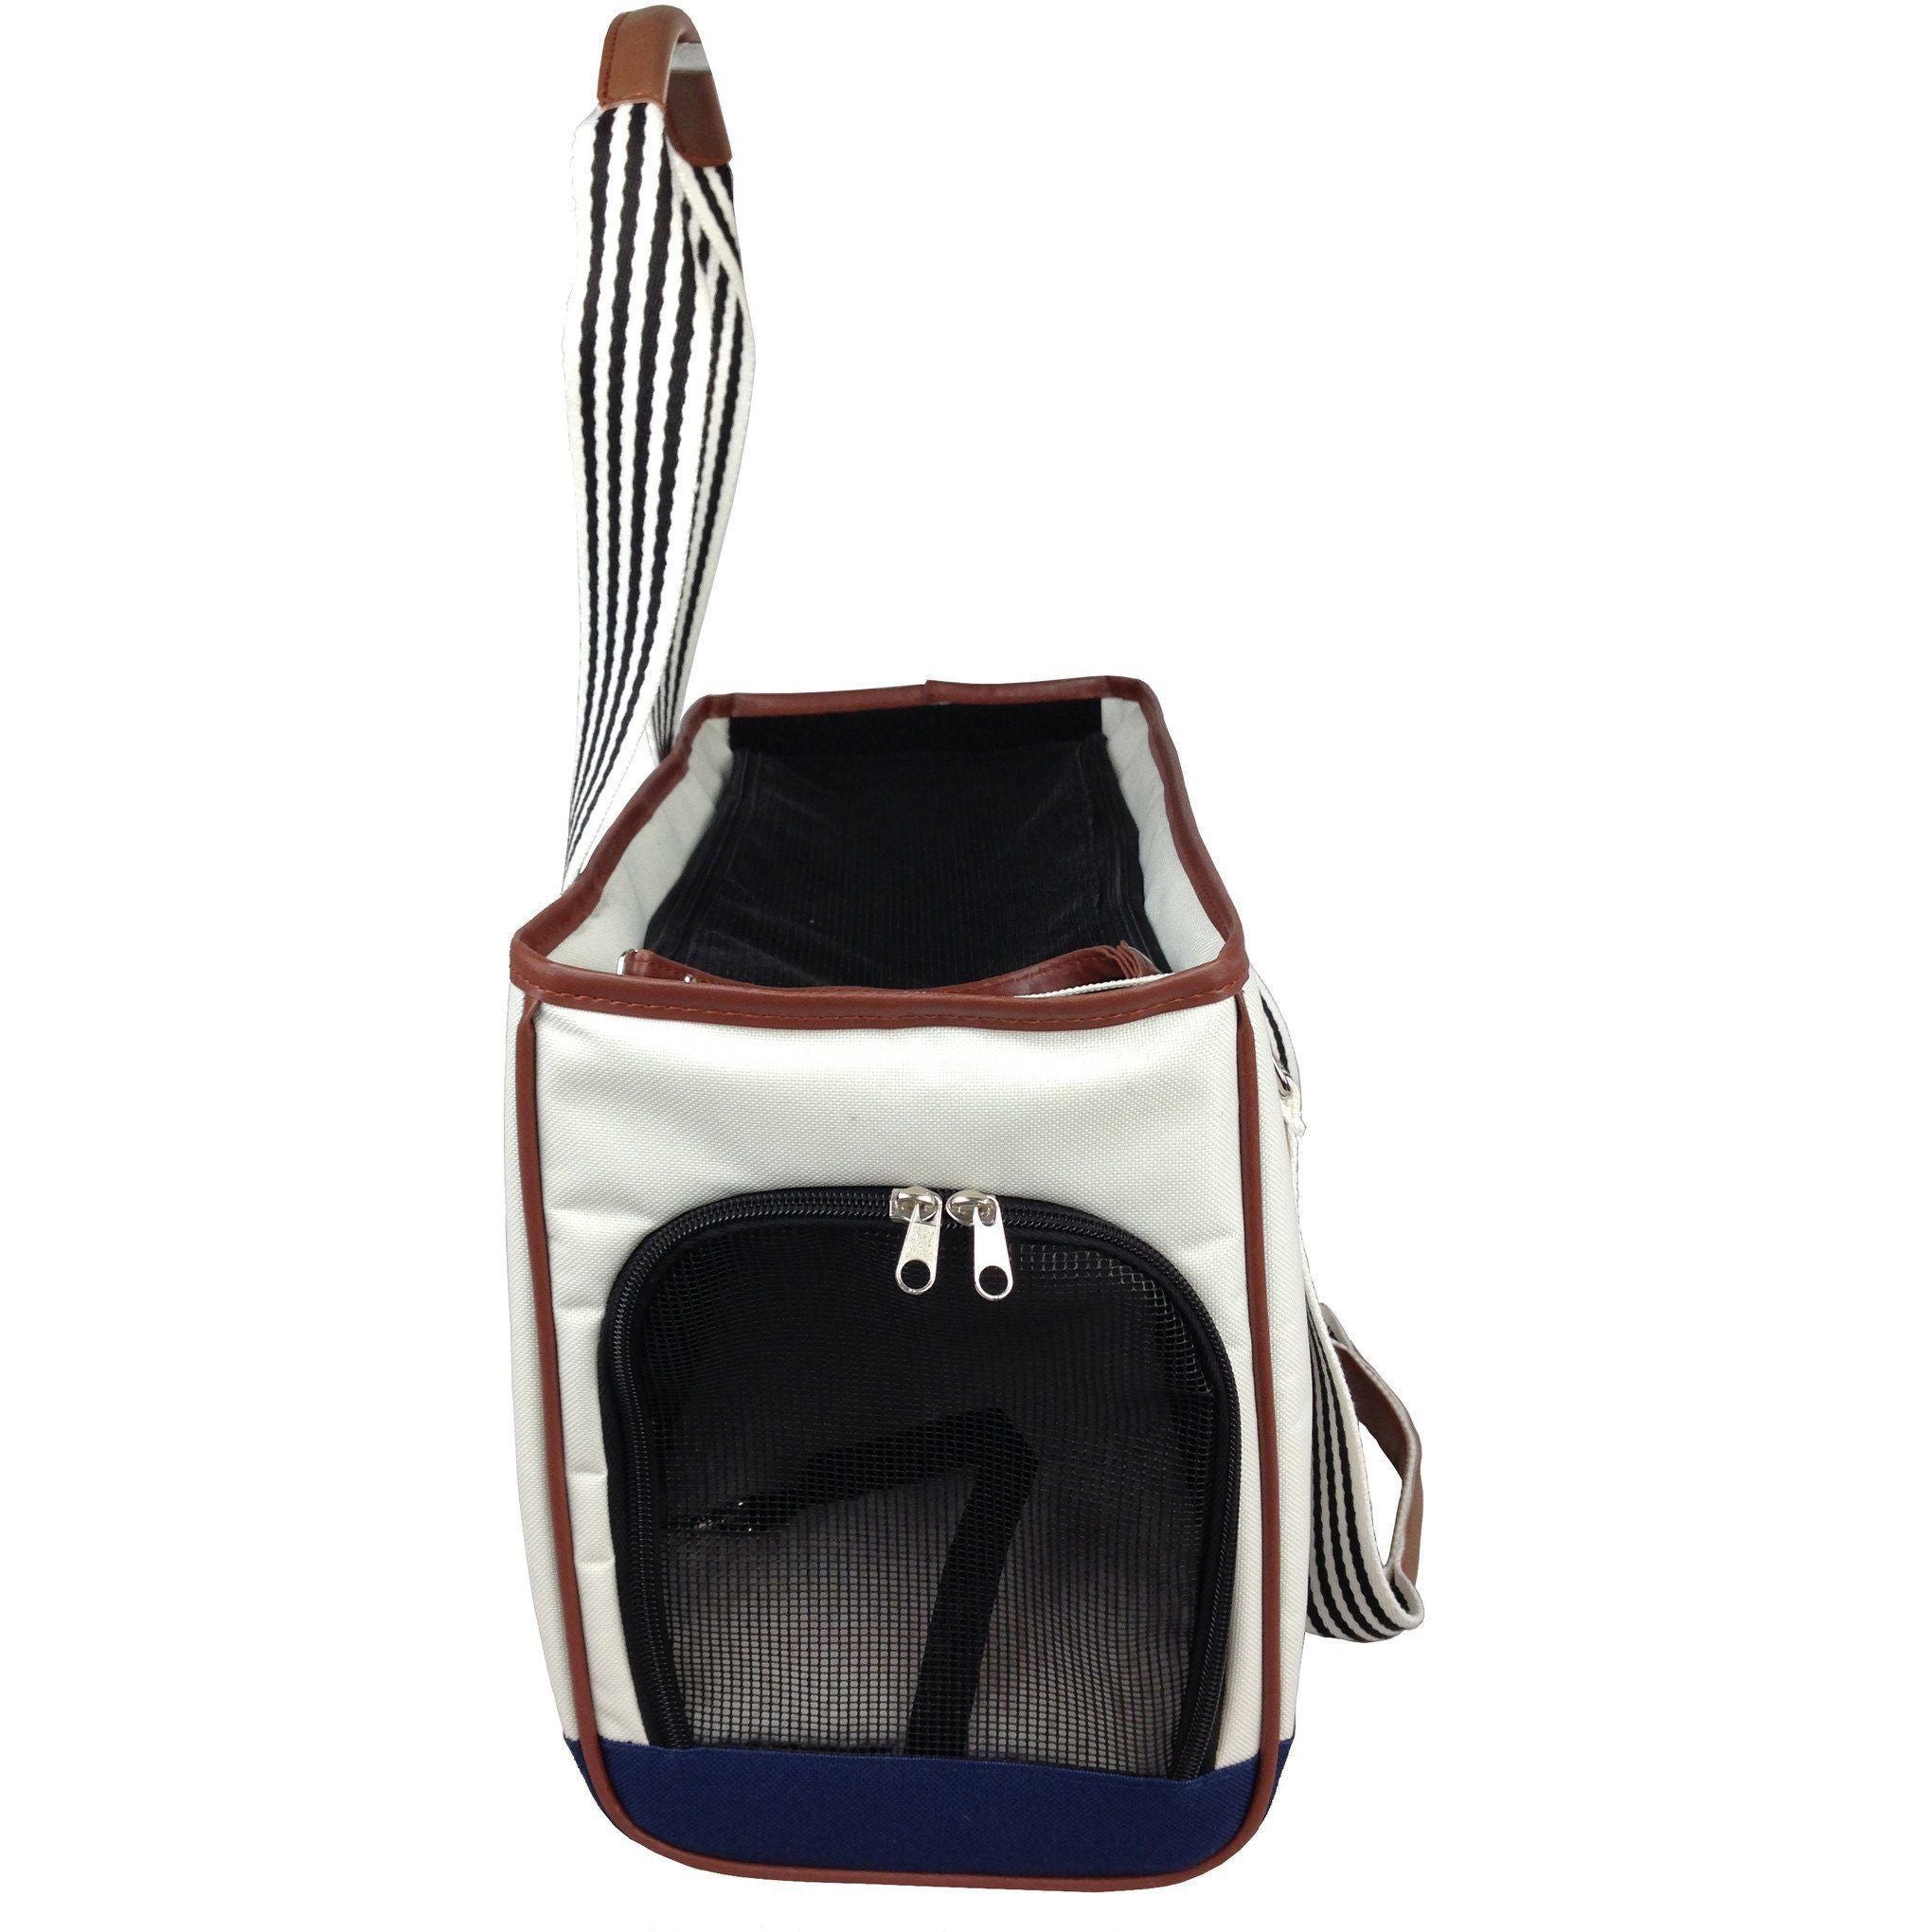 Pet Life ® 'Yacht Polo' Designer Travel Fashion Pet Dog Carrier w/ Pouch  